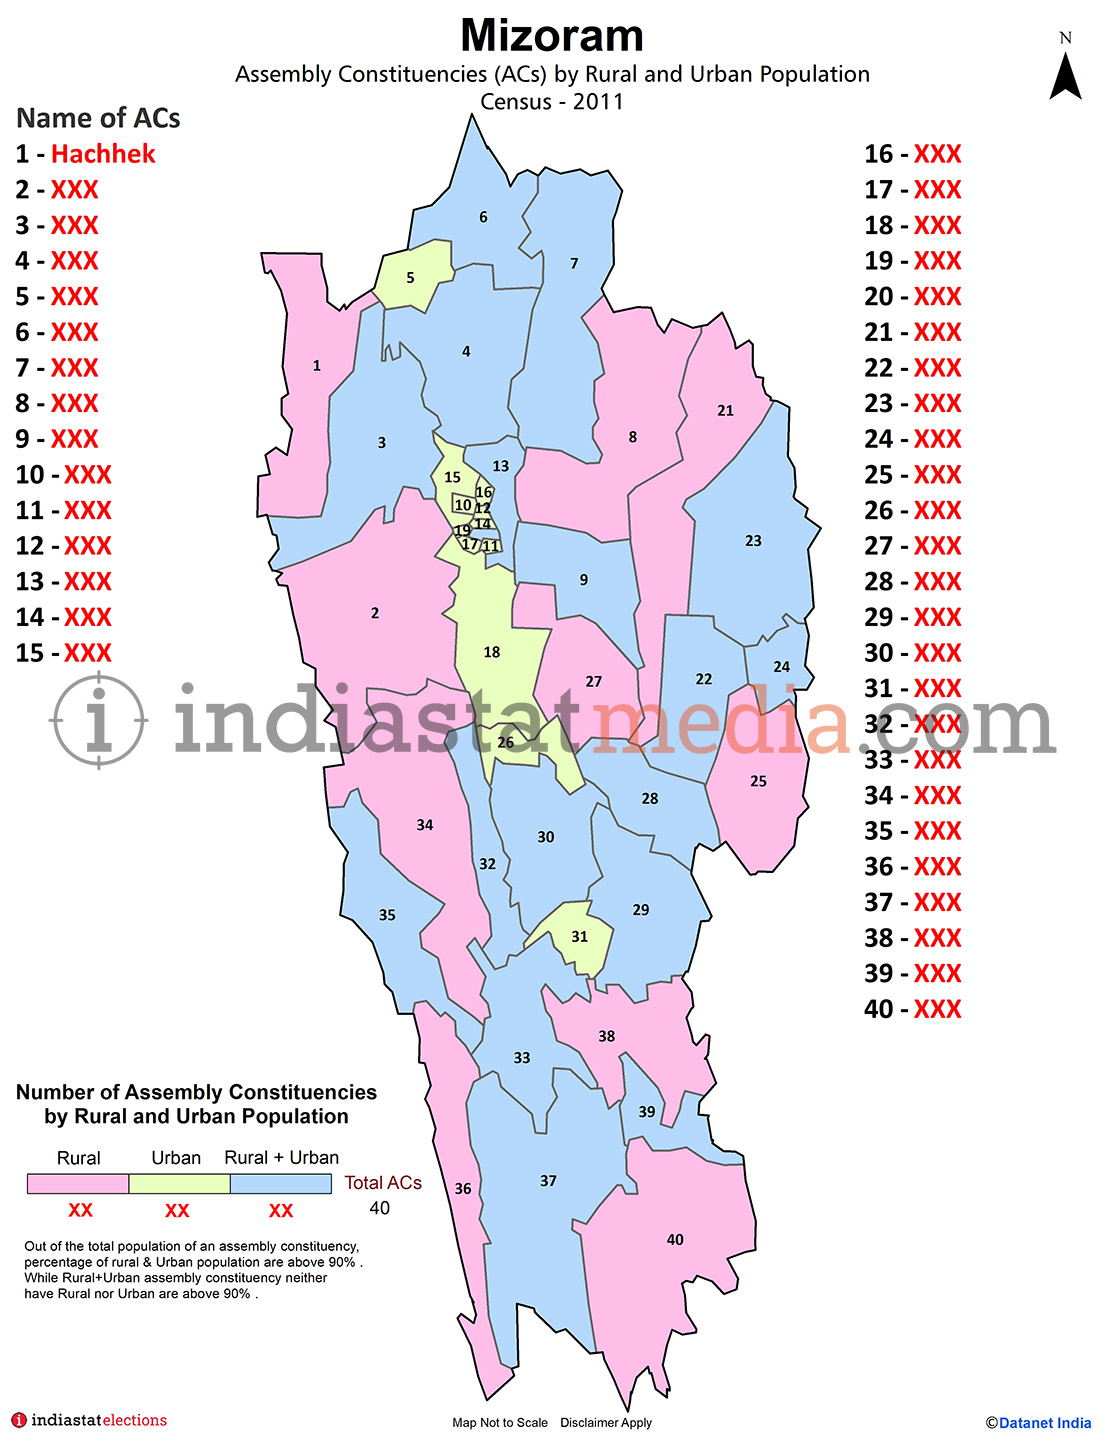 Assembly Constituencies (ACs) by Rural and Urban Population in Mizoram- Census 2011